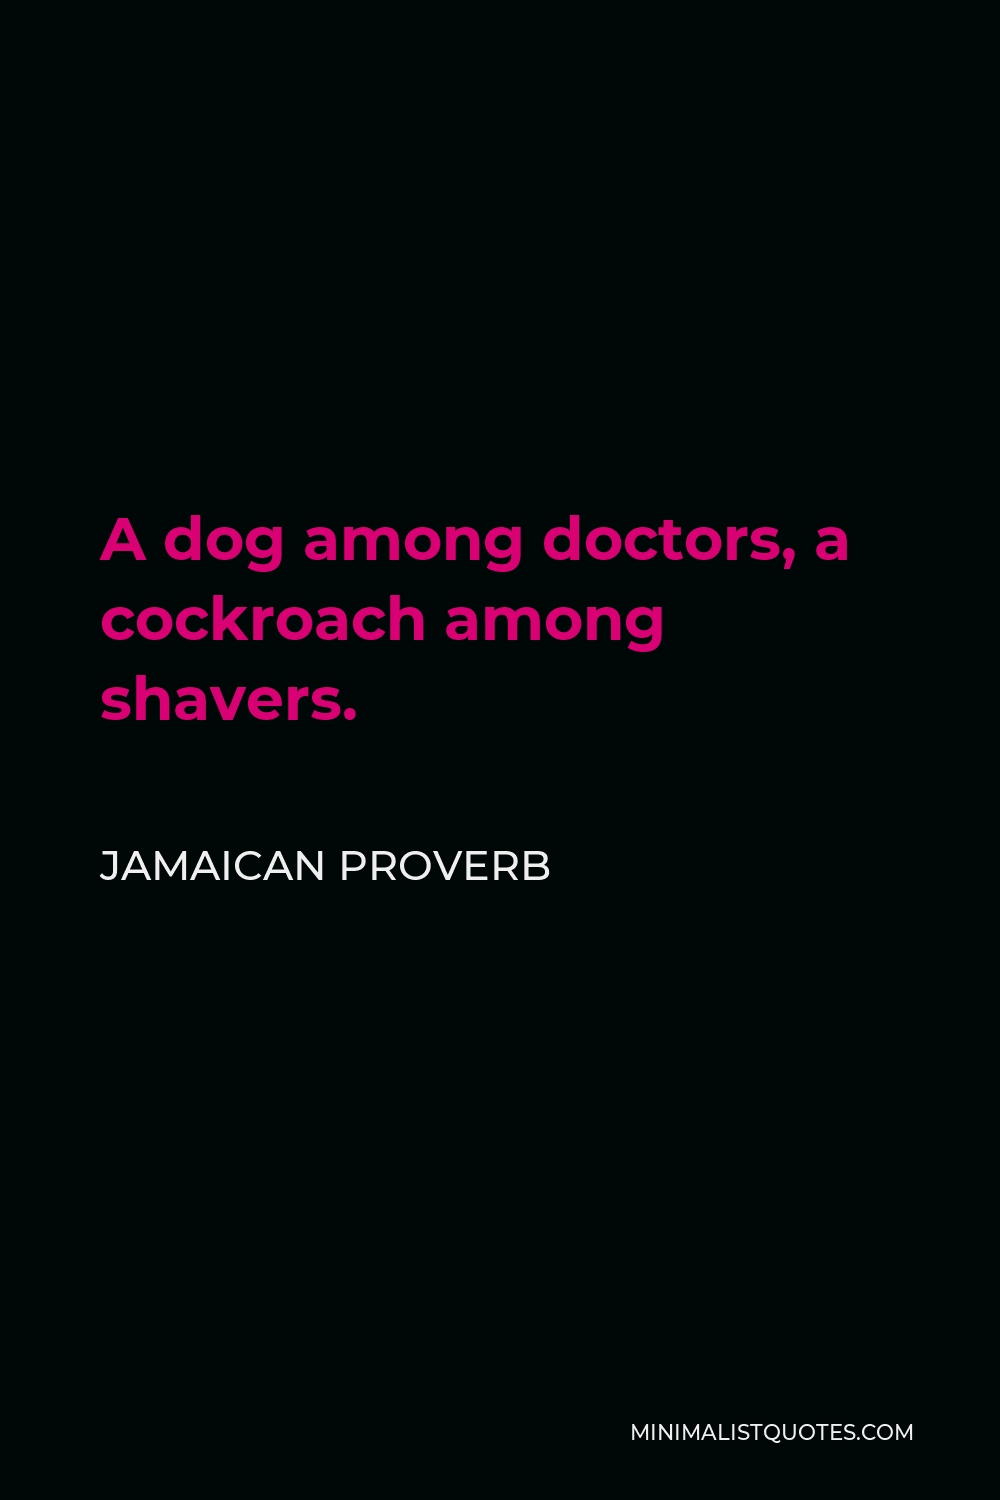 Jamaican Proverb Quote - A dog among doctors, a cockroach among shavers.